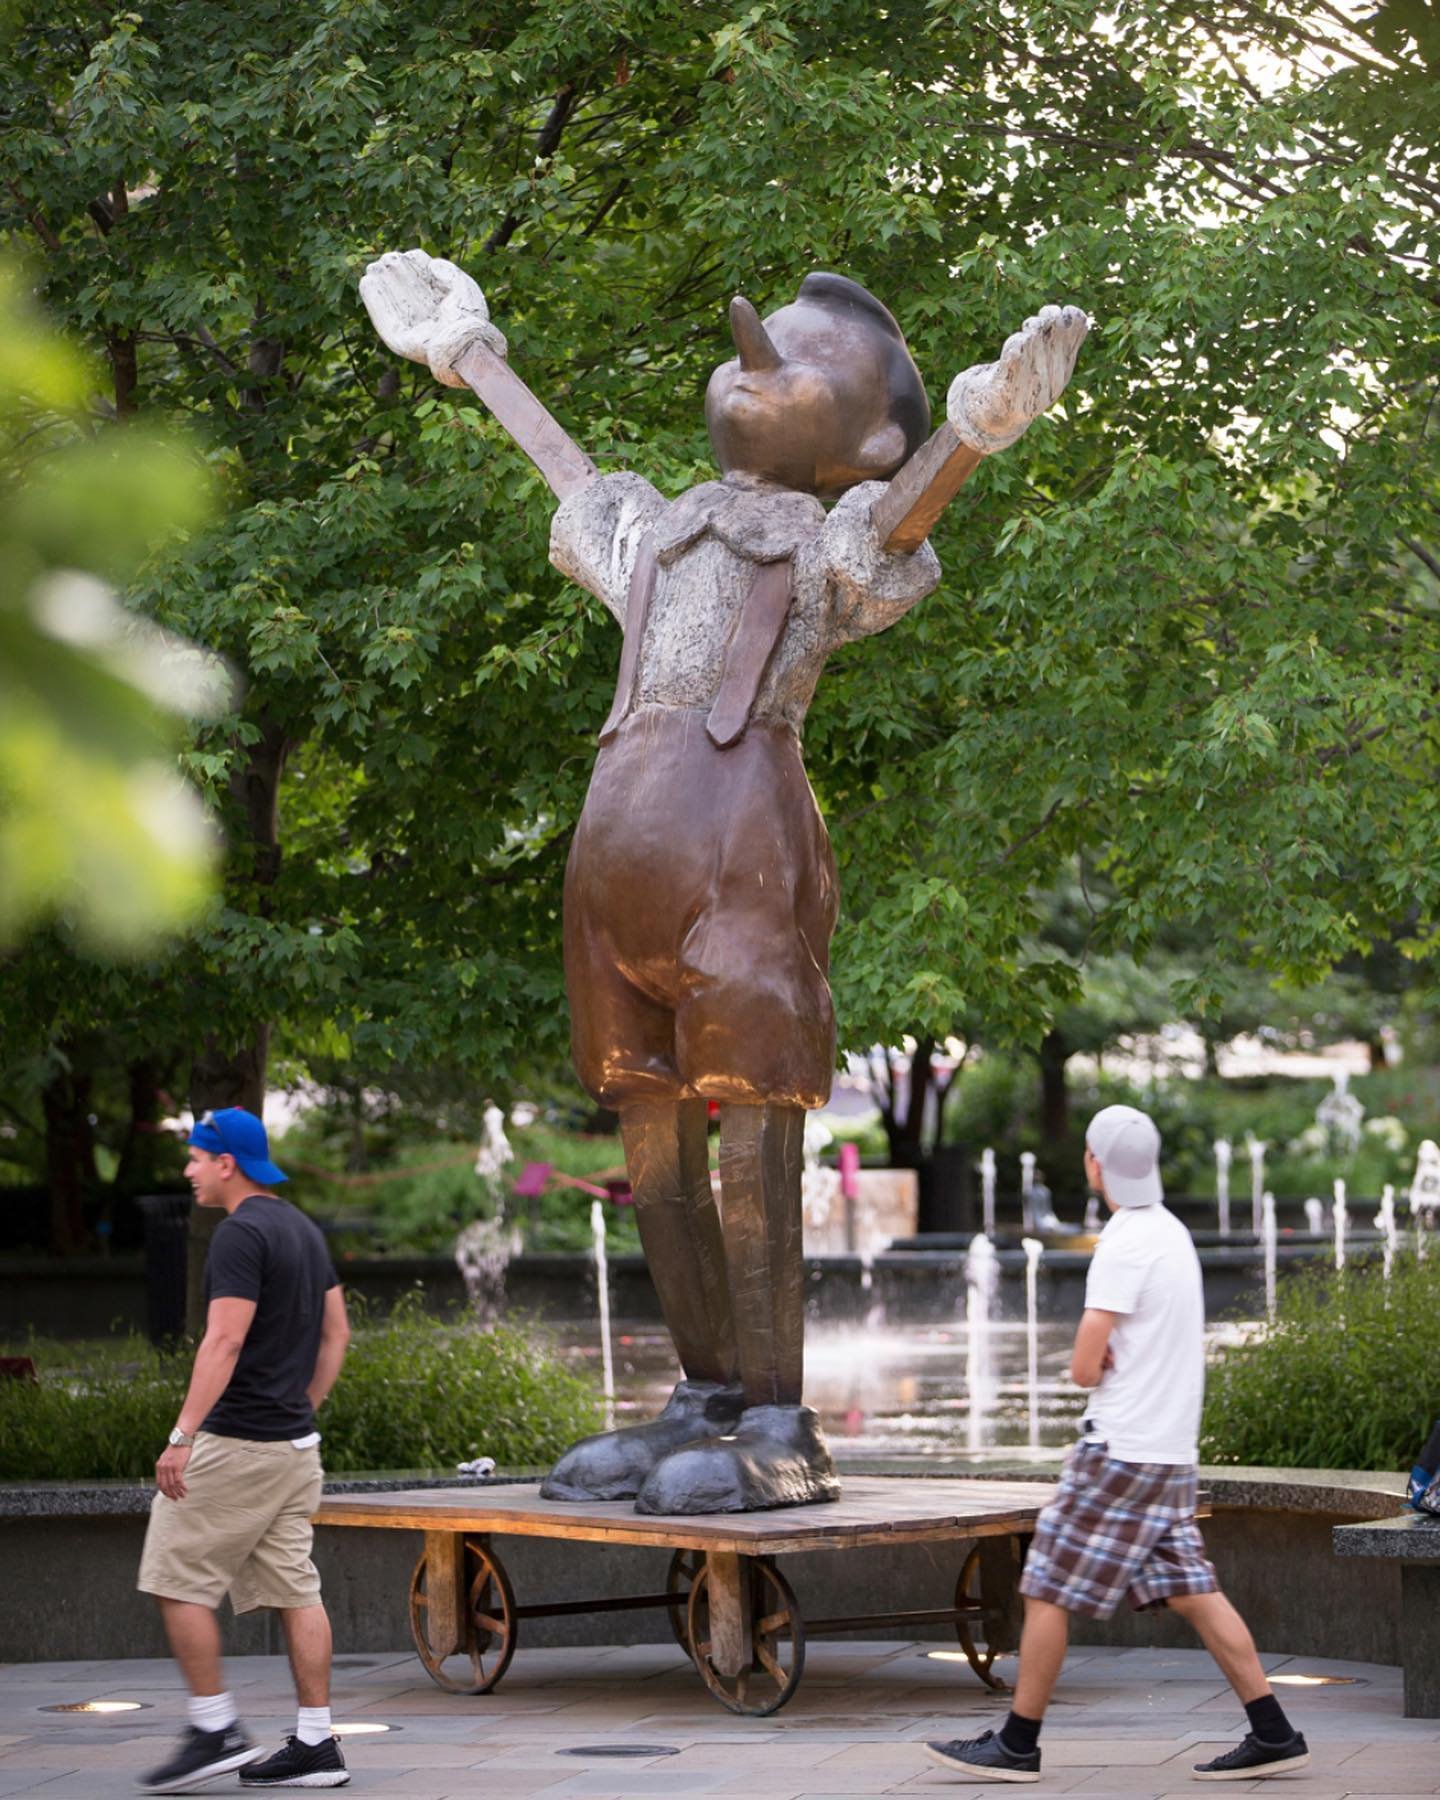 Standing atop a flat bronze cart with four wheels, Pinocchio proclaims his boyhood with outstretched arms in the sculpture Big White Gloves, Big Four Wheels, 2009 @jimdinestudio 

The 10-foot, pointy-nosed fellow has been reinstalled facing Ninth Str